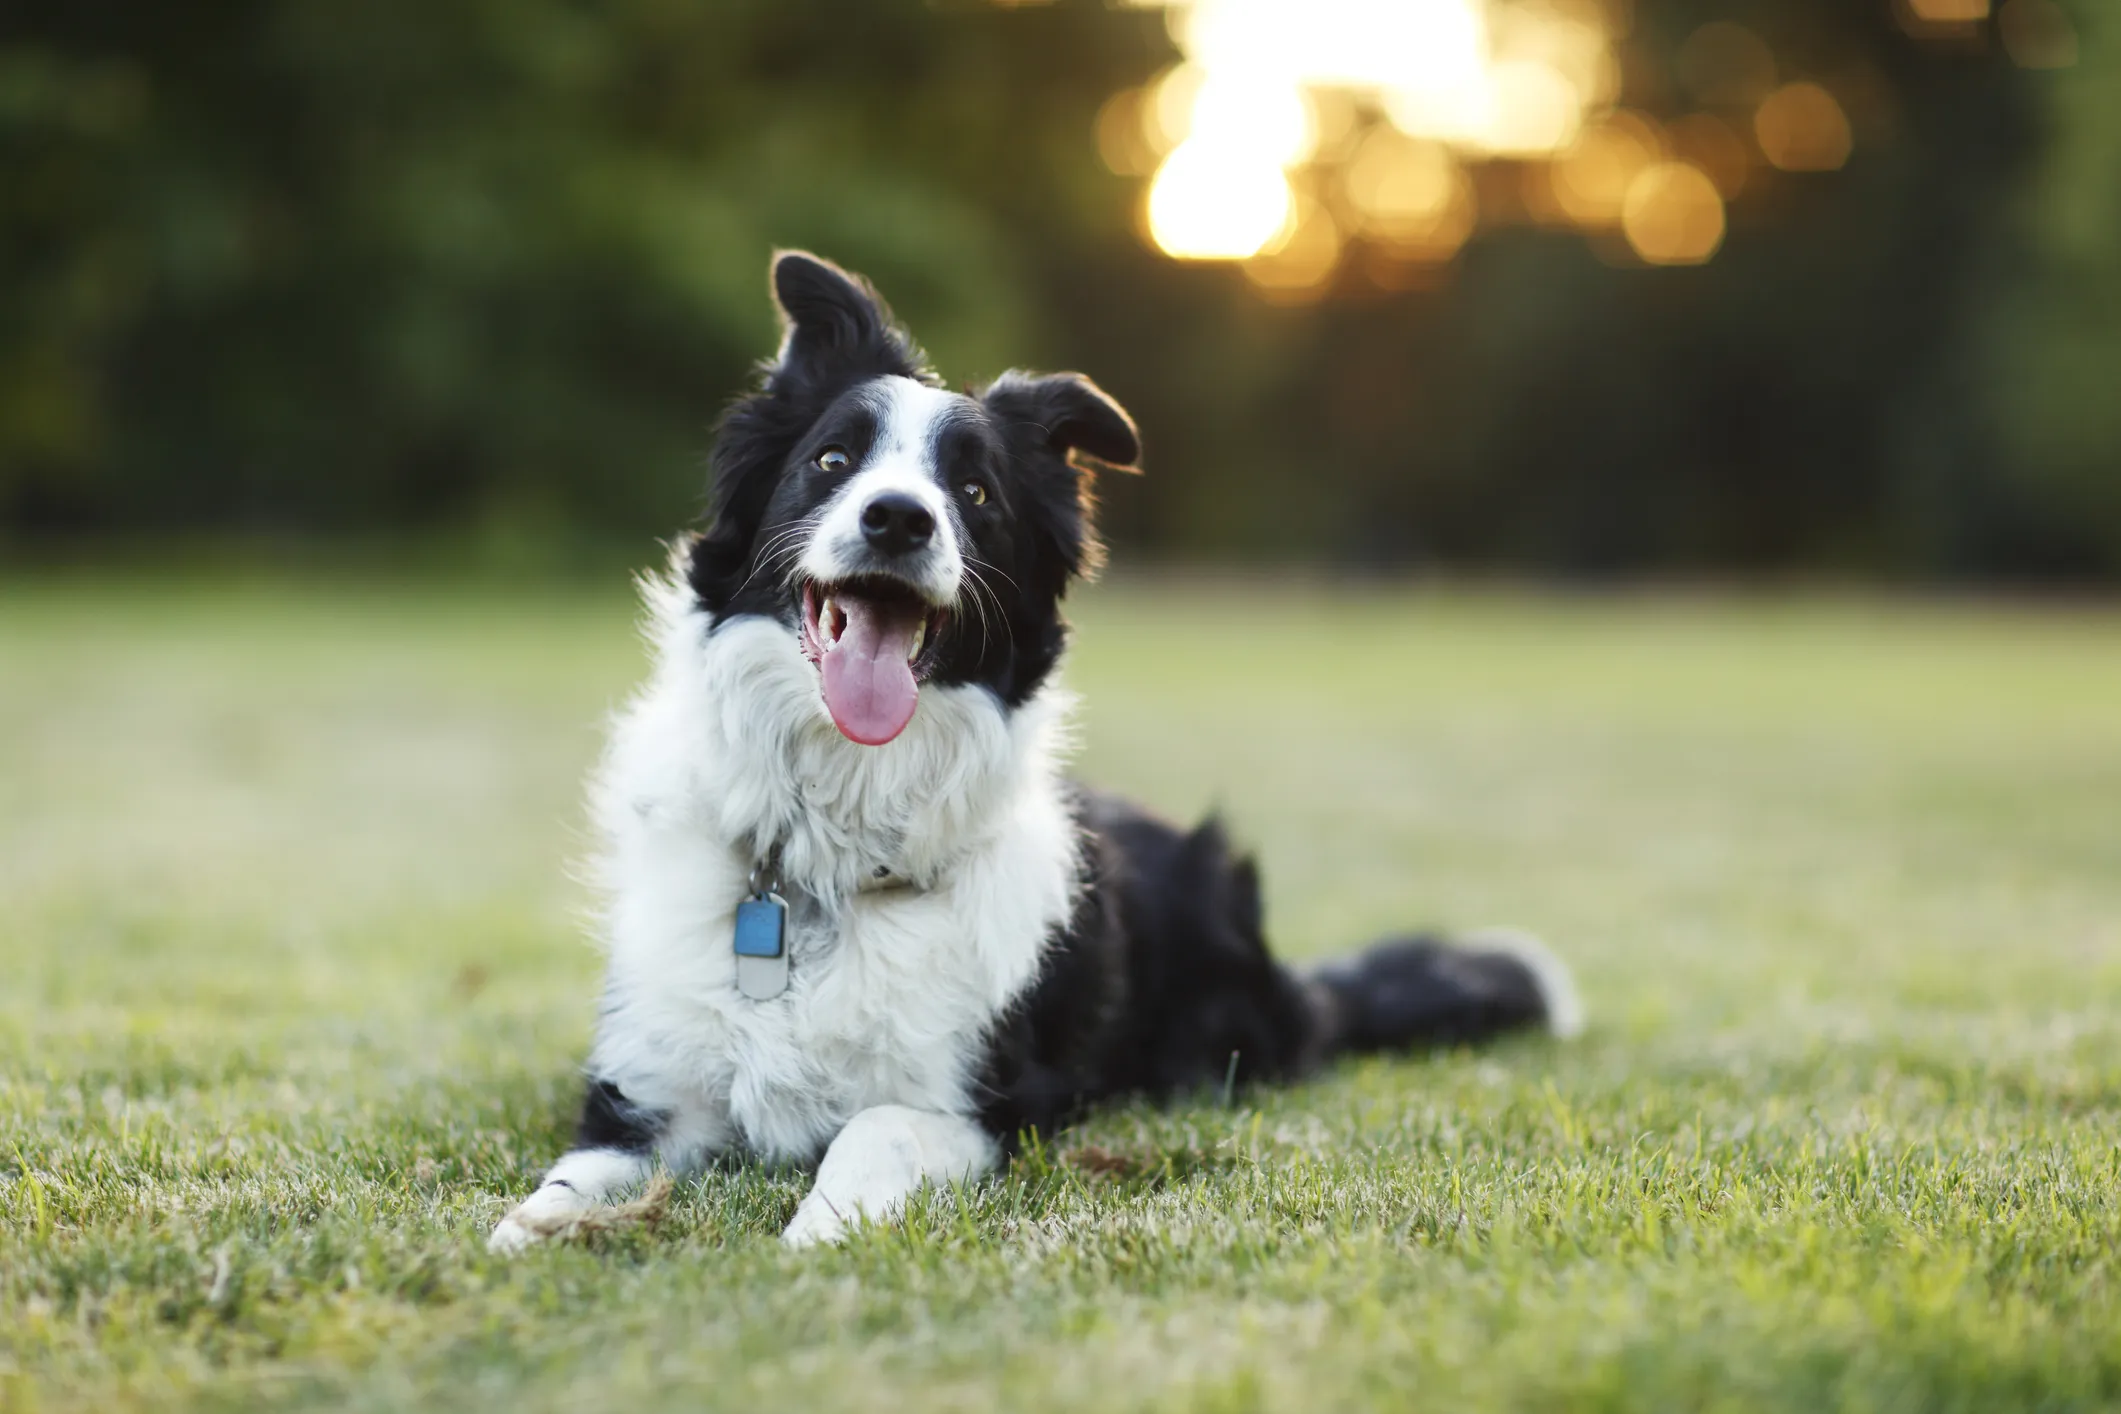 What is the smartest dog breed?